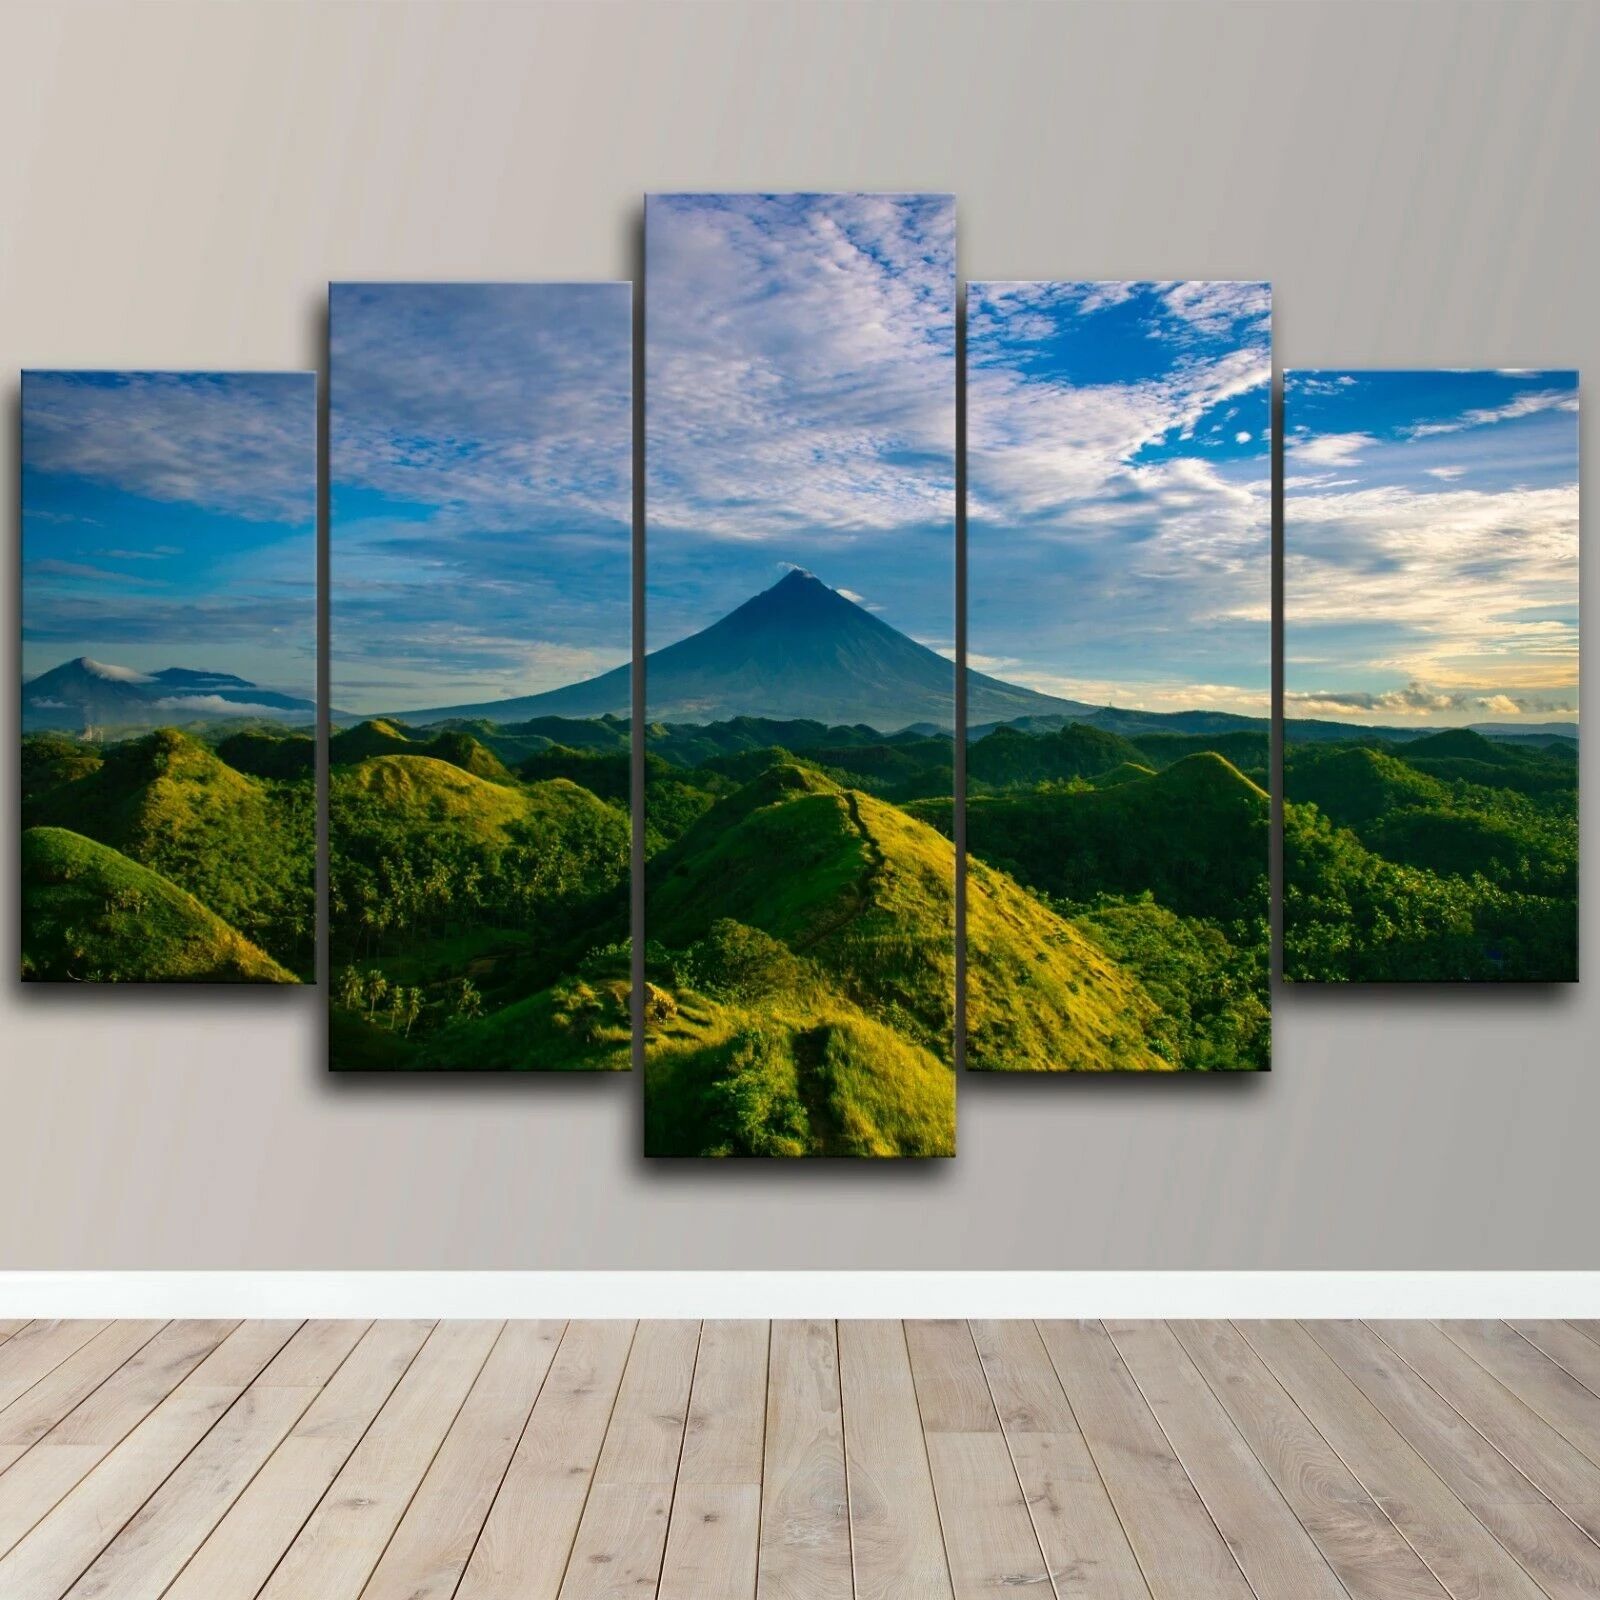 Mountains Green Hills Sky Clouds Beauty 5 Piece Canvas Wall Art Print Home  Decor 5 Pieces Pictures Paintings Hd Print No Framed| | – Aliexpress Inside Recent Mountains And Hills Wall Art (View 18 of 20)